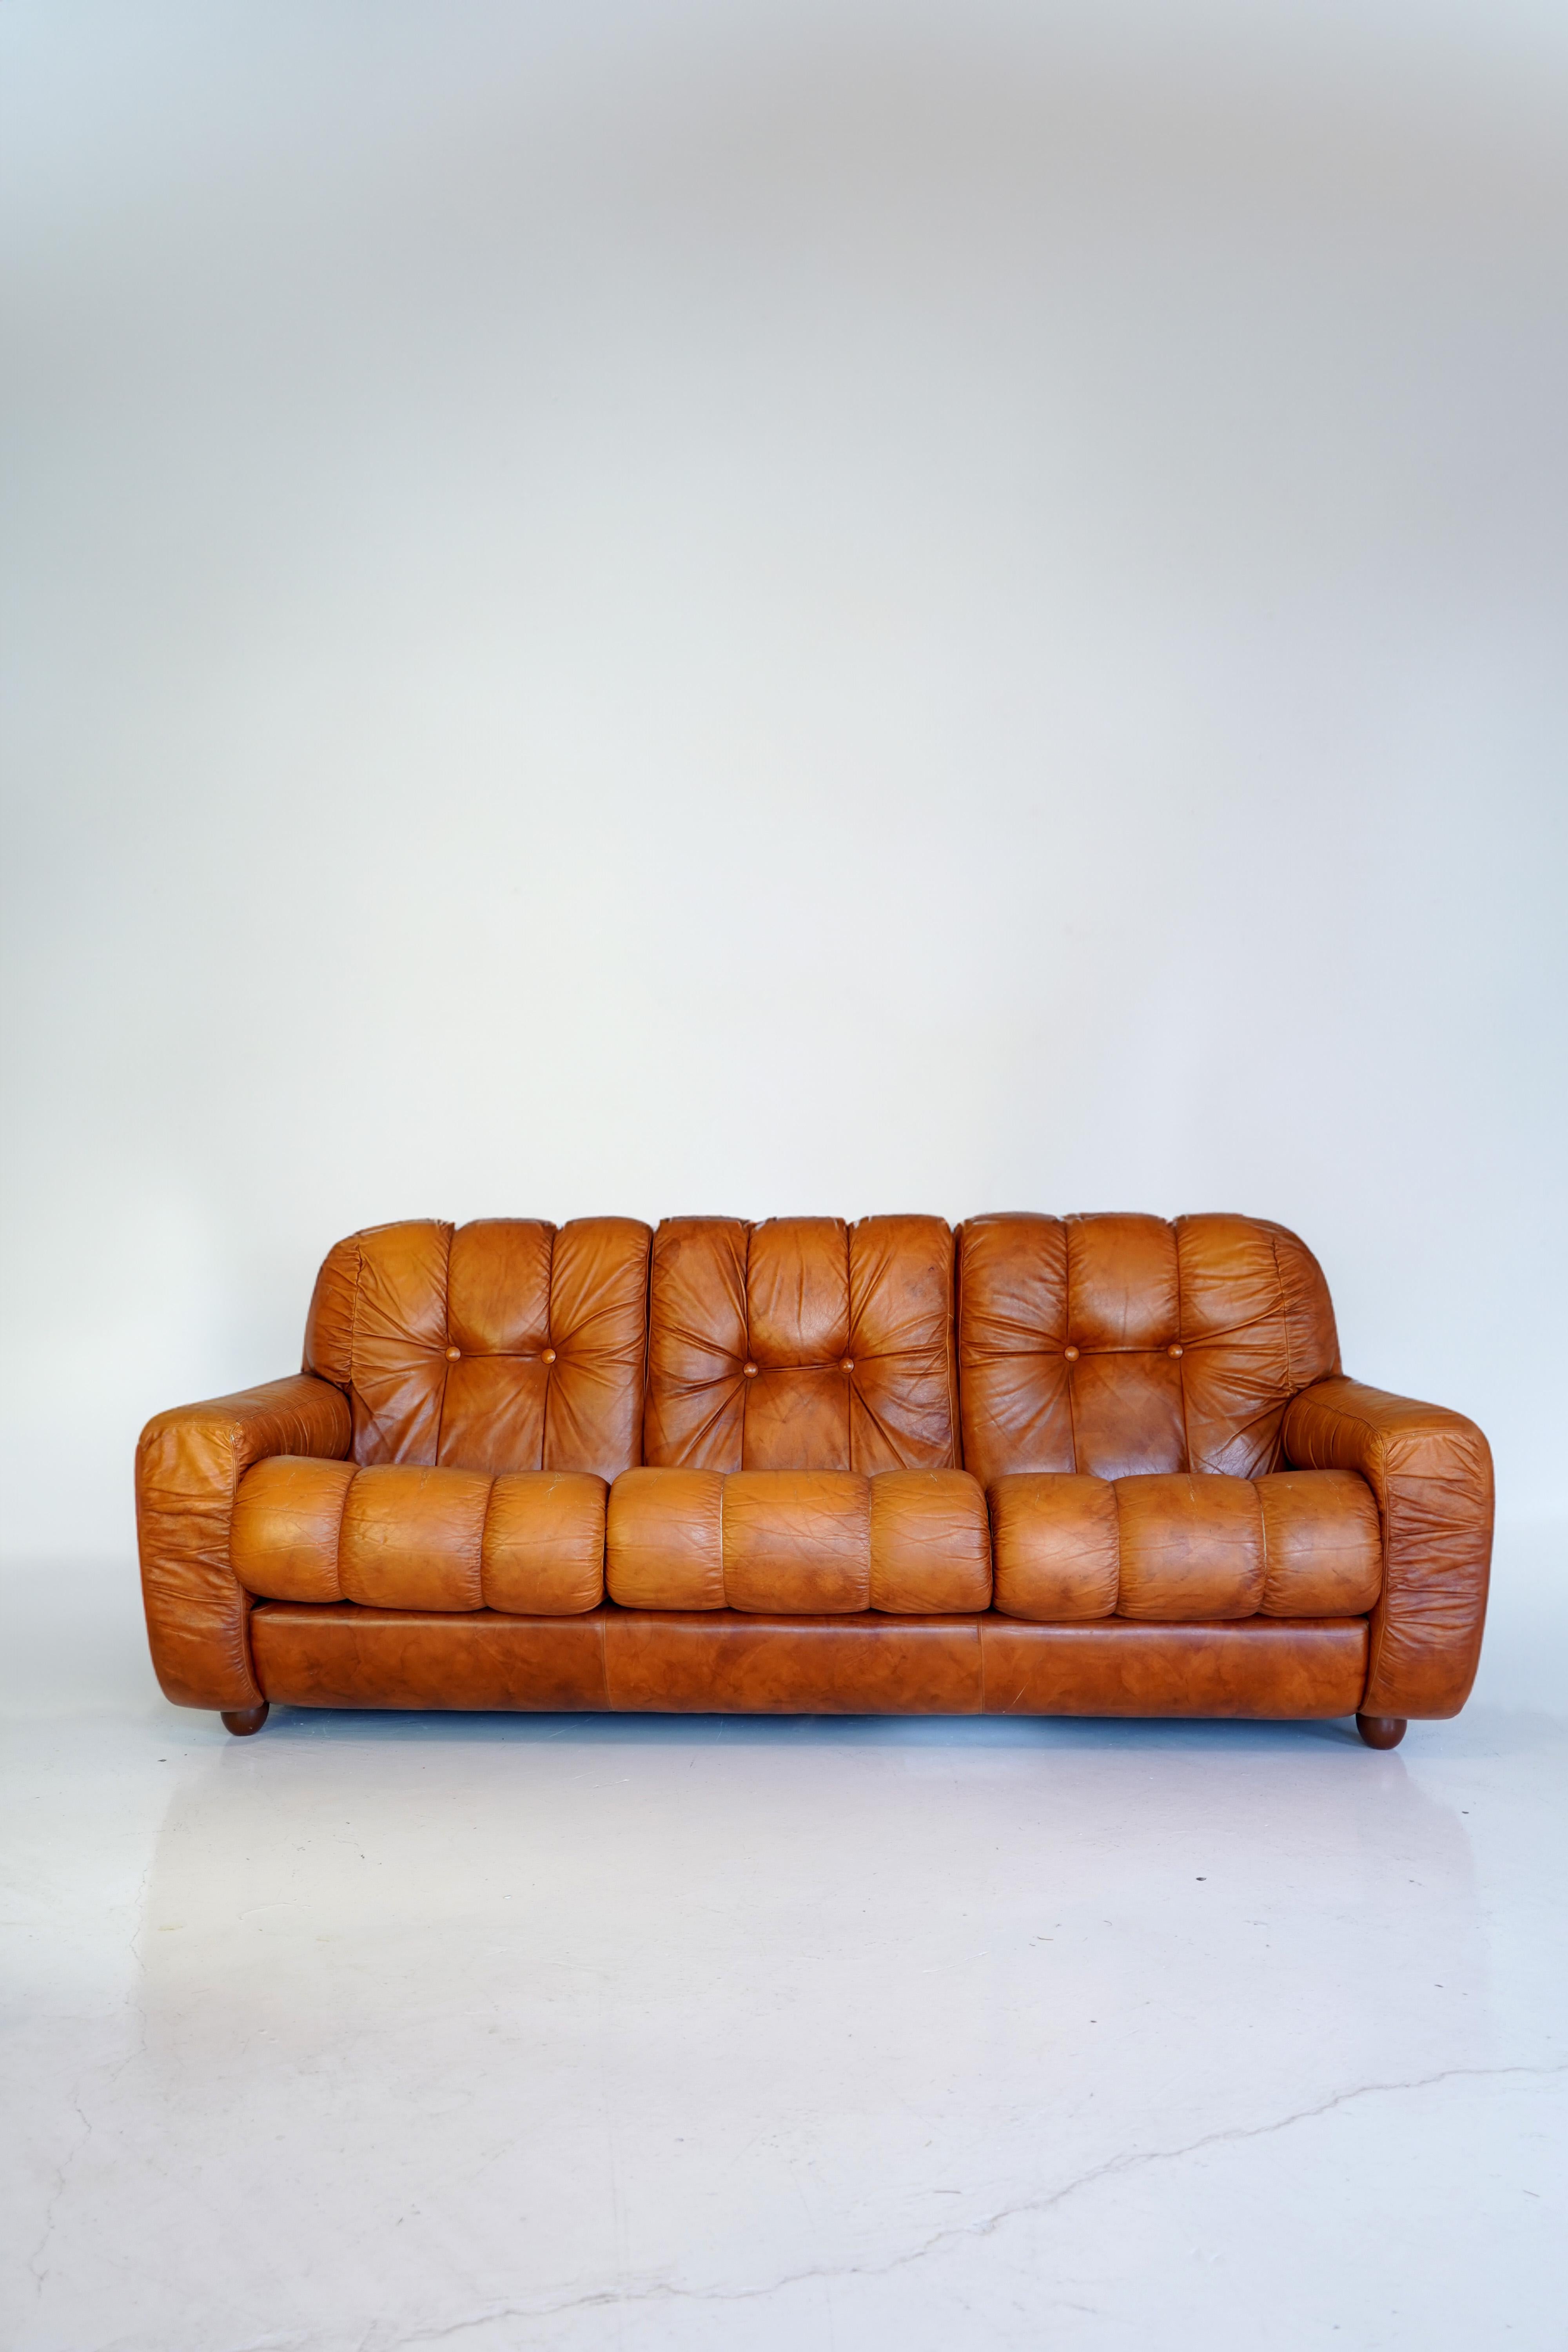 Classic 70s vibes with this Italian leather sofa with vinyl frame. In the style of sofa designs by De Sede. Matching armchairs also available.

Wear in 2 spots on back edges of the frame however the rest of the sofa is in very good condition.